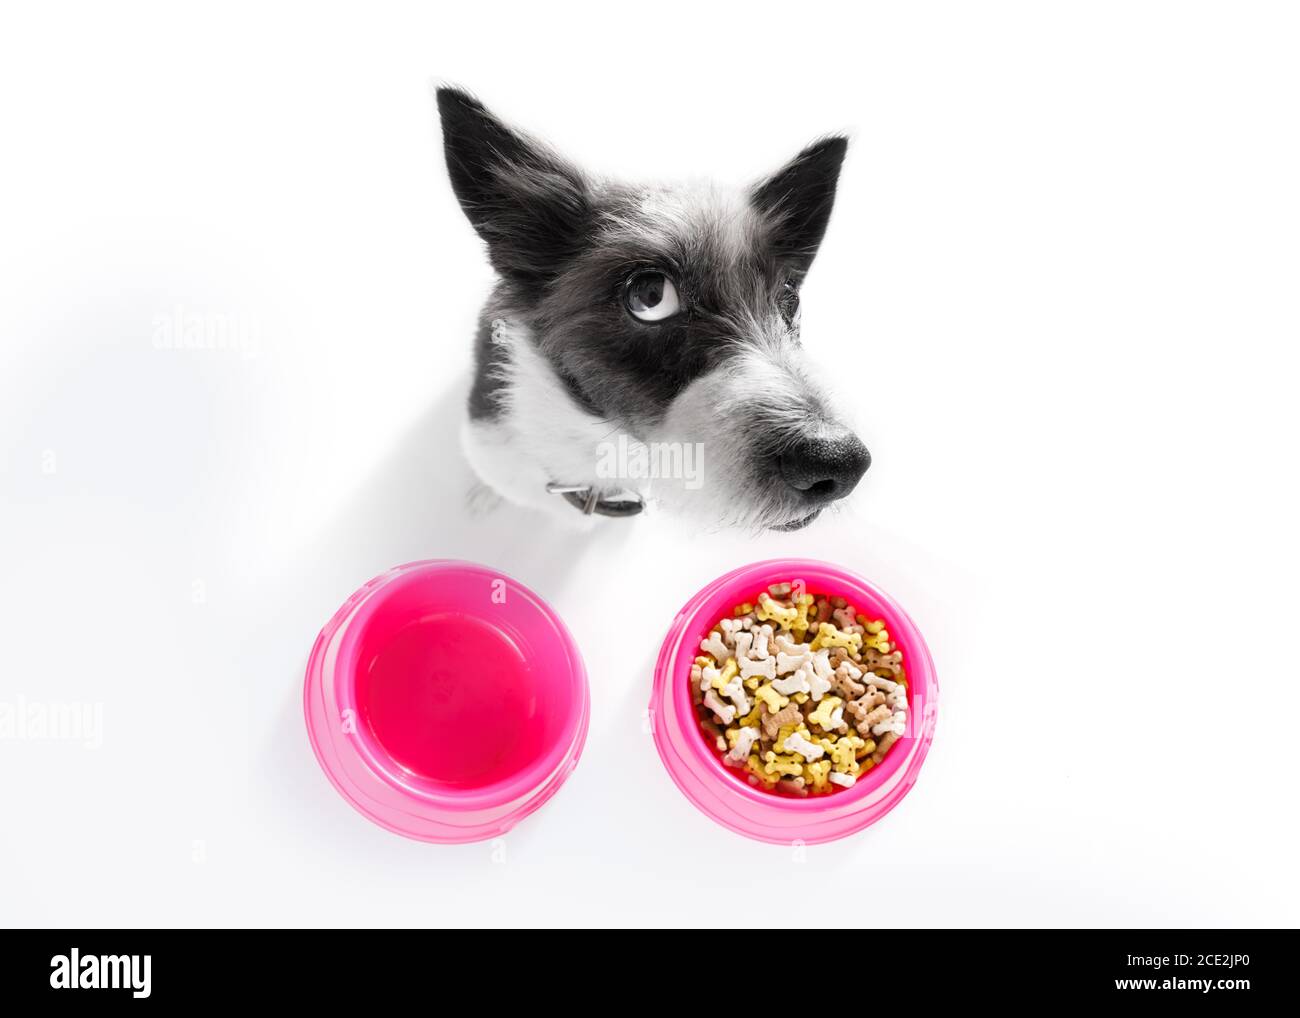 hungry dog with food bowl Stock Photo